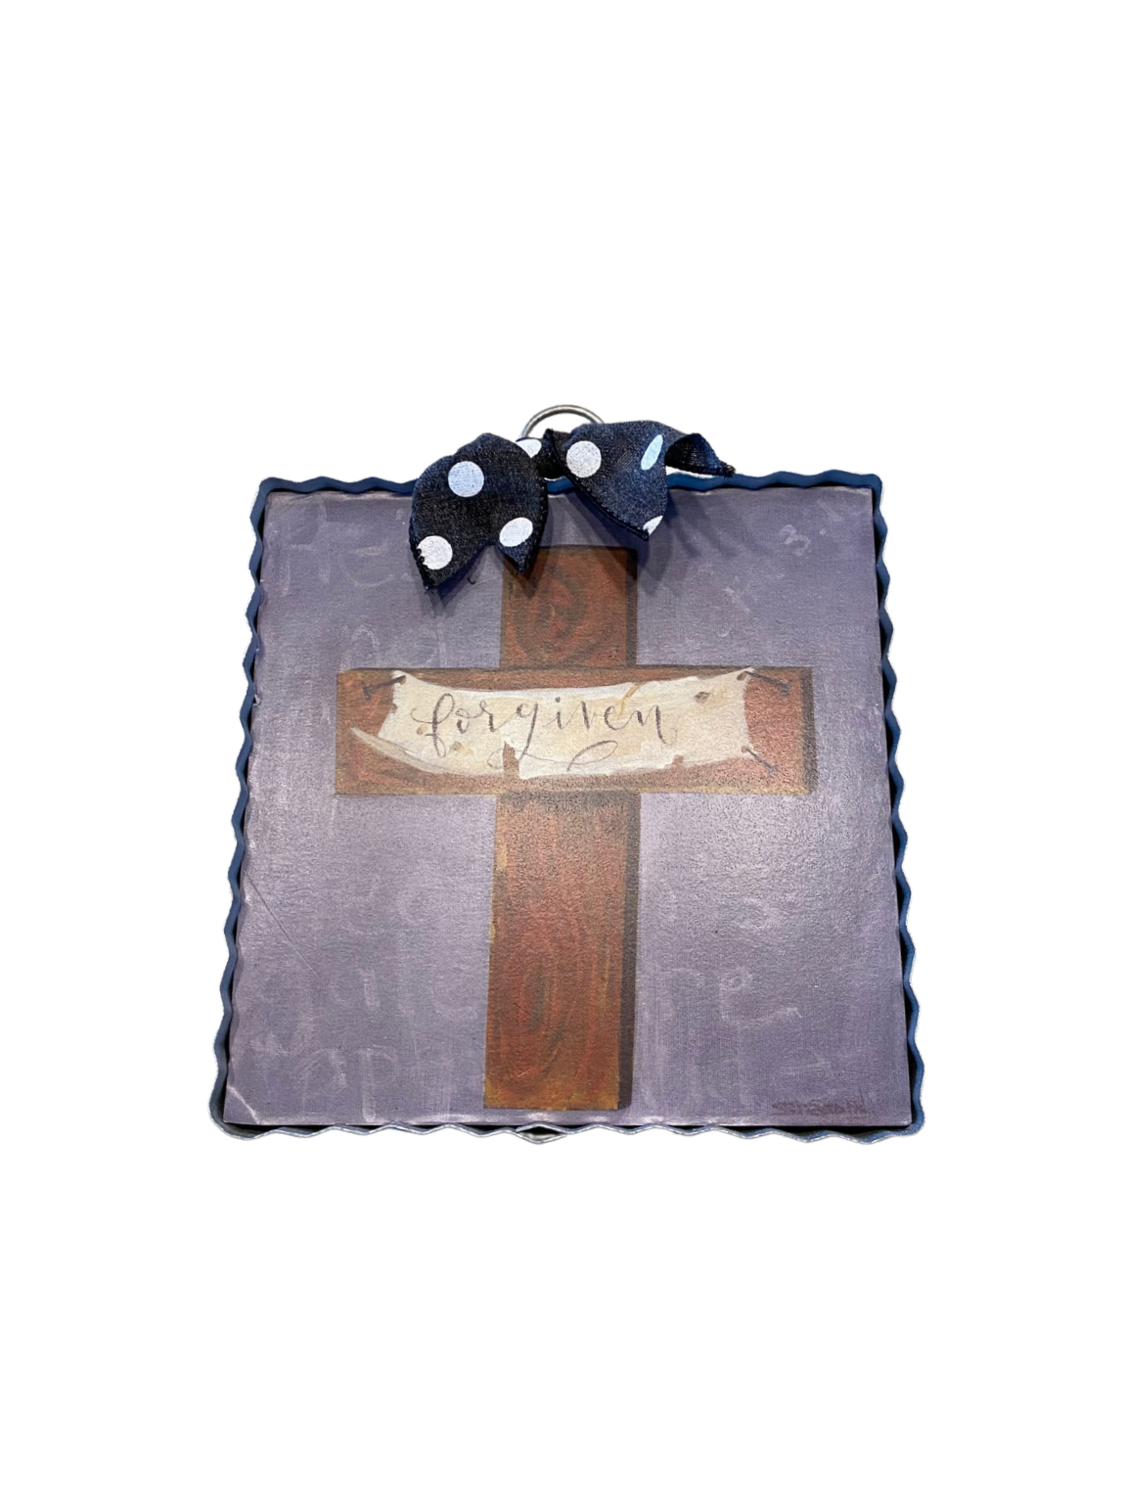 RTC GALLERY "FORGIVEN" CROSS